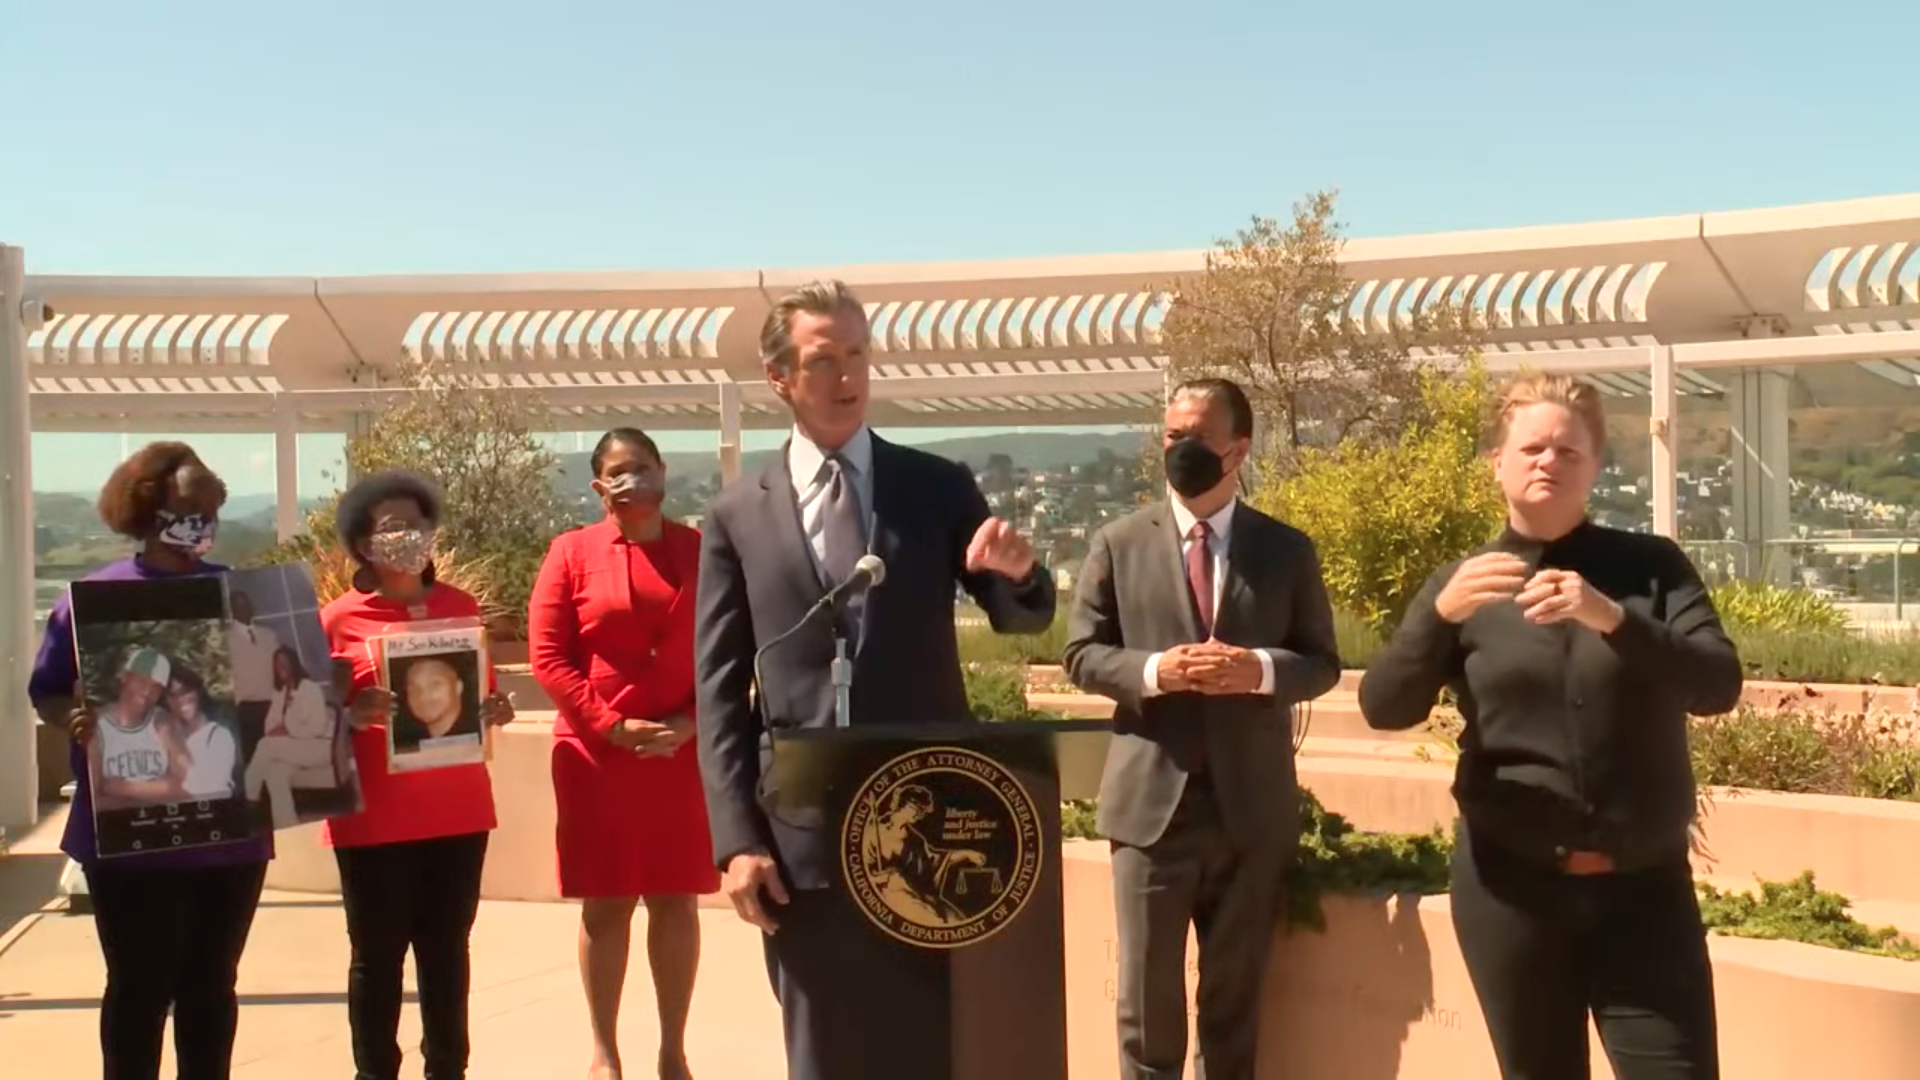 Photo of Gavin Newsom speaking from a podium with Rob Bonta and associates standing behind him in an open courtyard